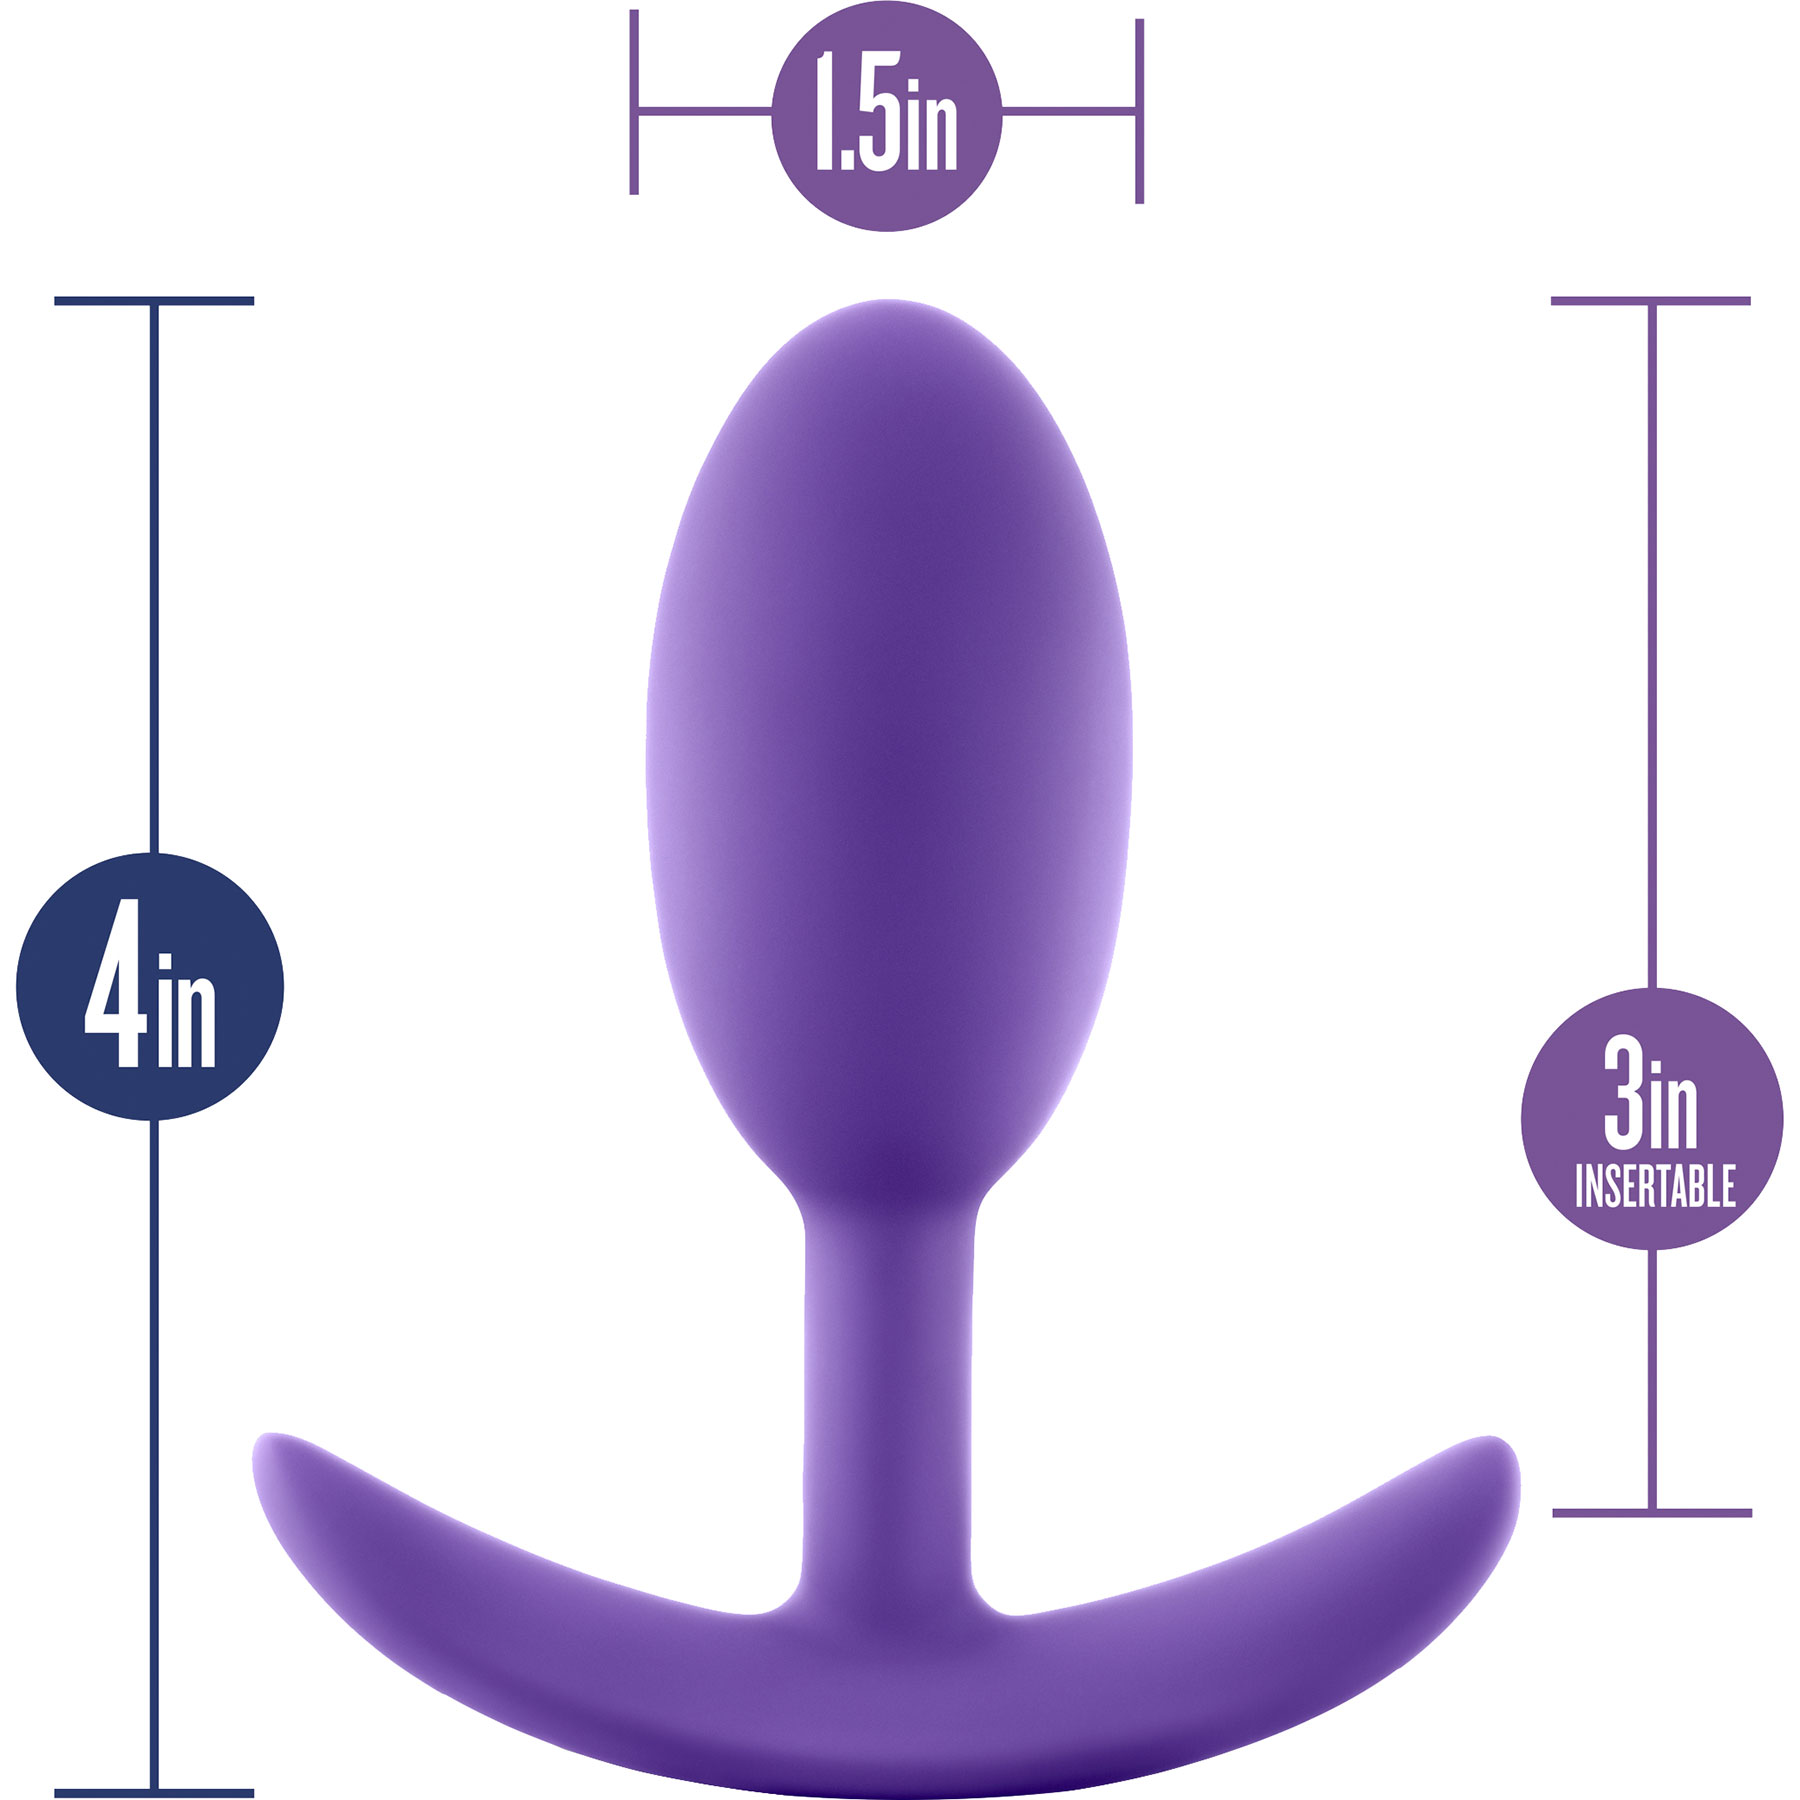 Luxe Wearable Silicone Vibra Slim Butt Plug by Blush, Small - Measurements